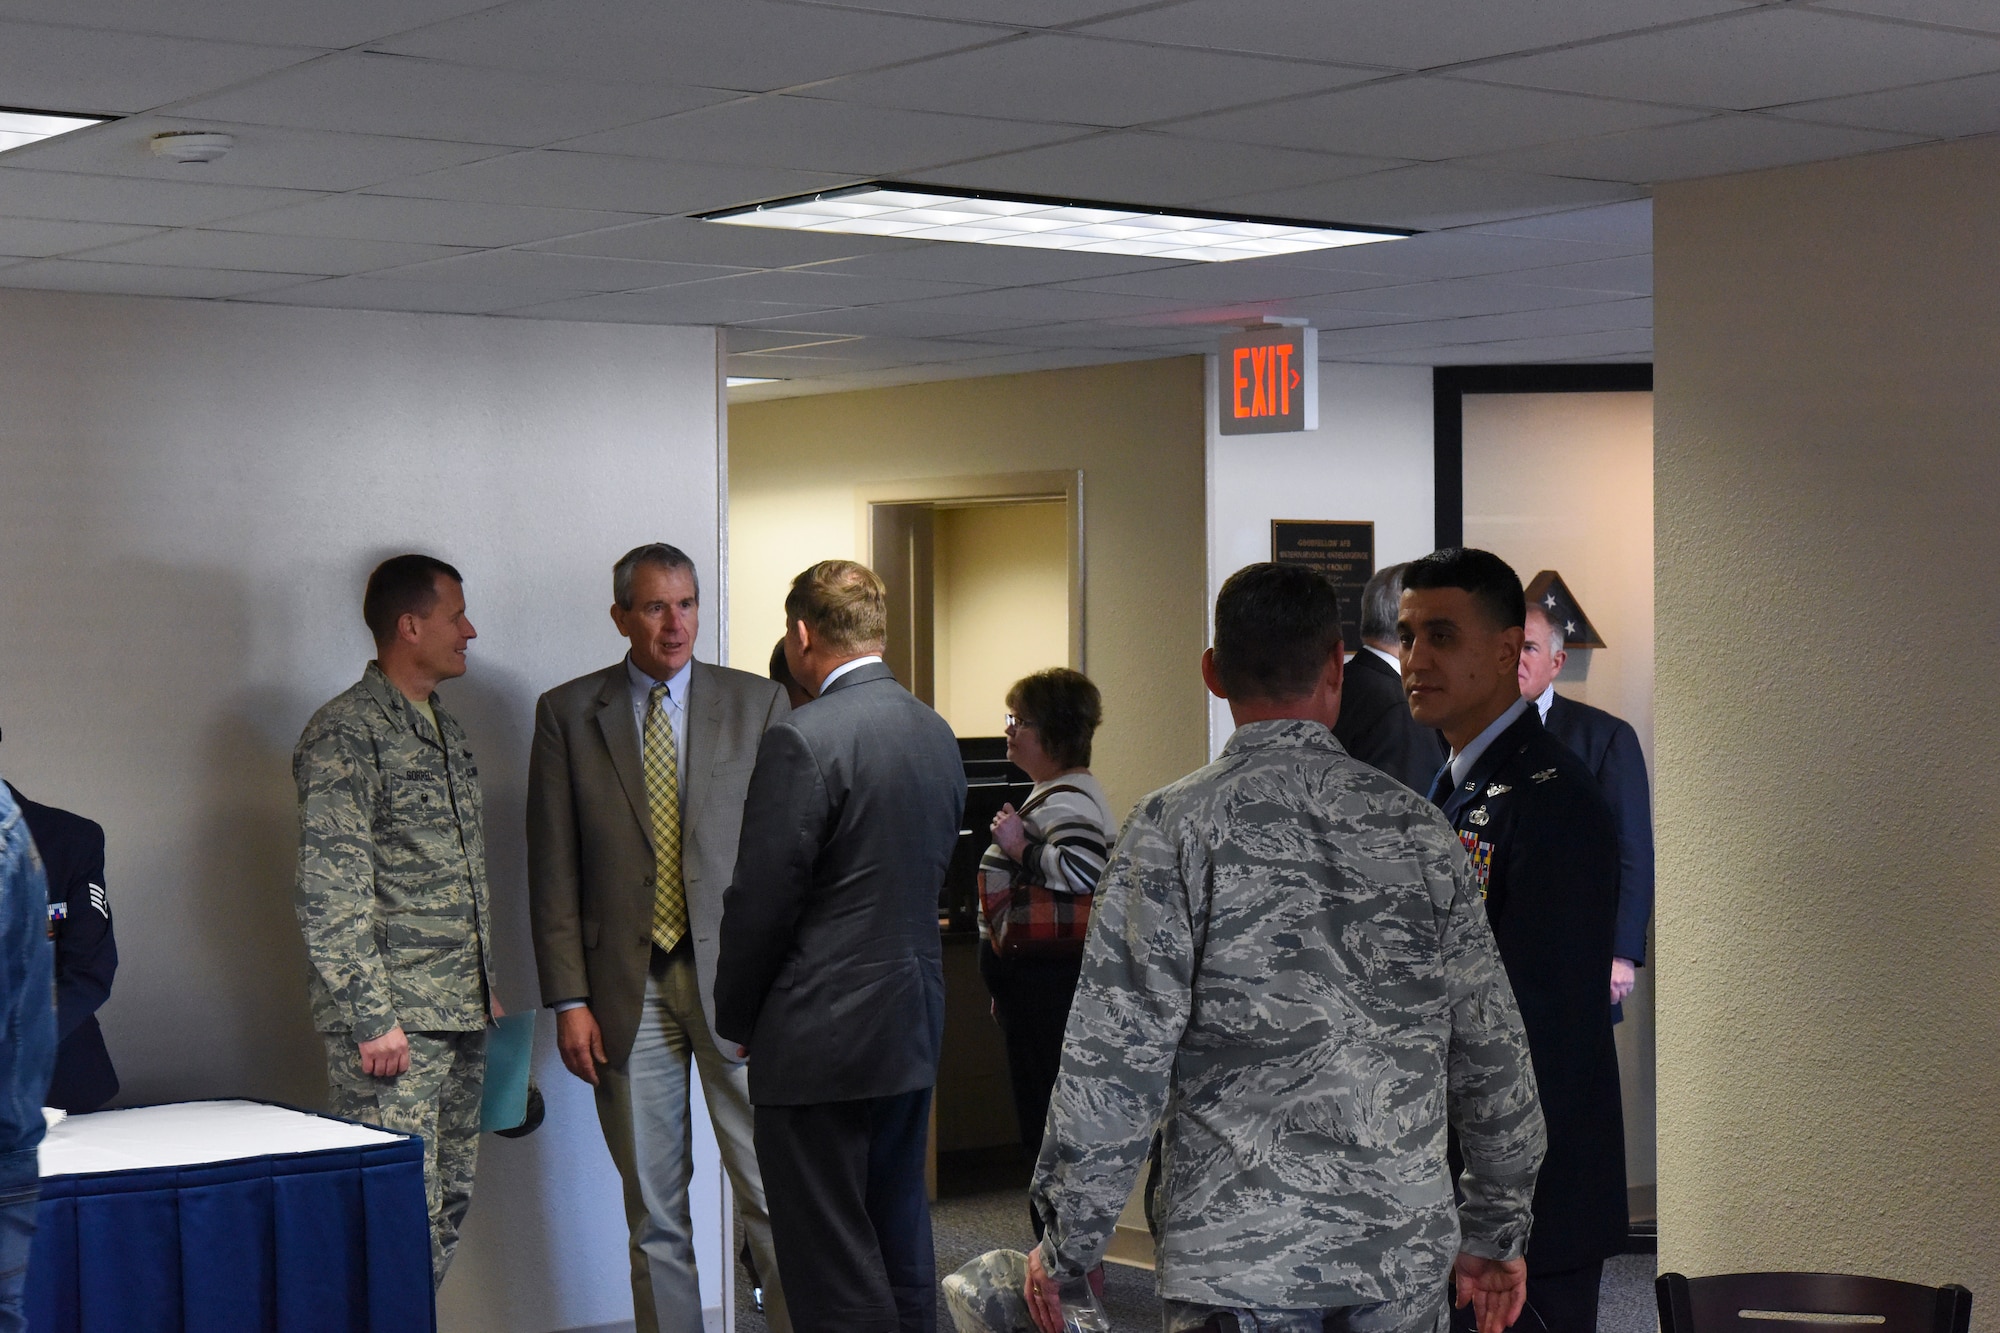 Guests socialize after the ribbon cutting of the International Intelligence Training Center on Goodfellow Air Force Base, Texas, Nov. 21, 2017. Base leadership and San Angelo civic leaders had the chance to examine the training center after the ceremony. (U.S. Air Force photo by Airman 1st Class Zachary Chapman/Released)